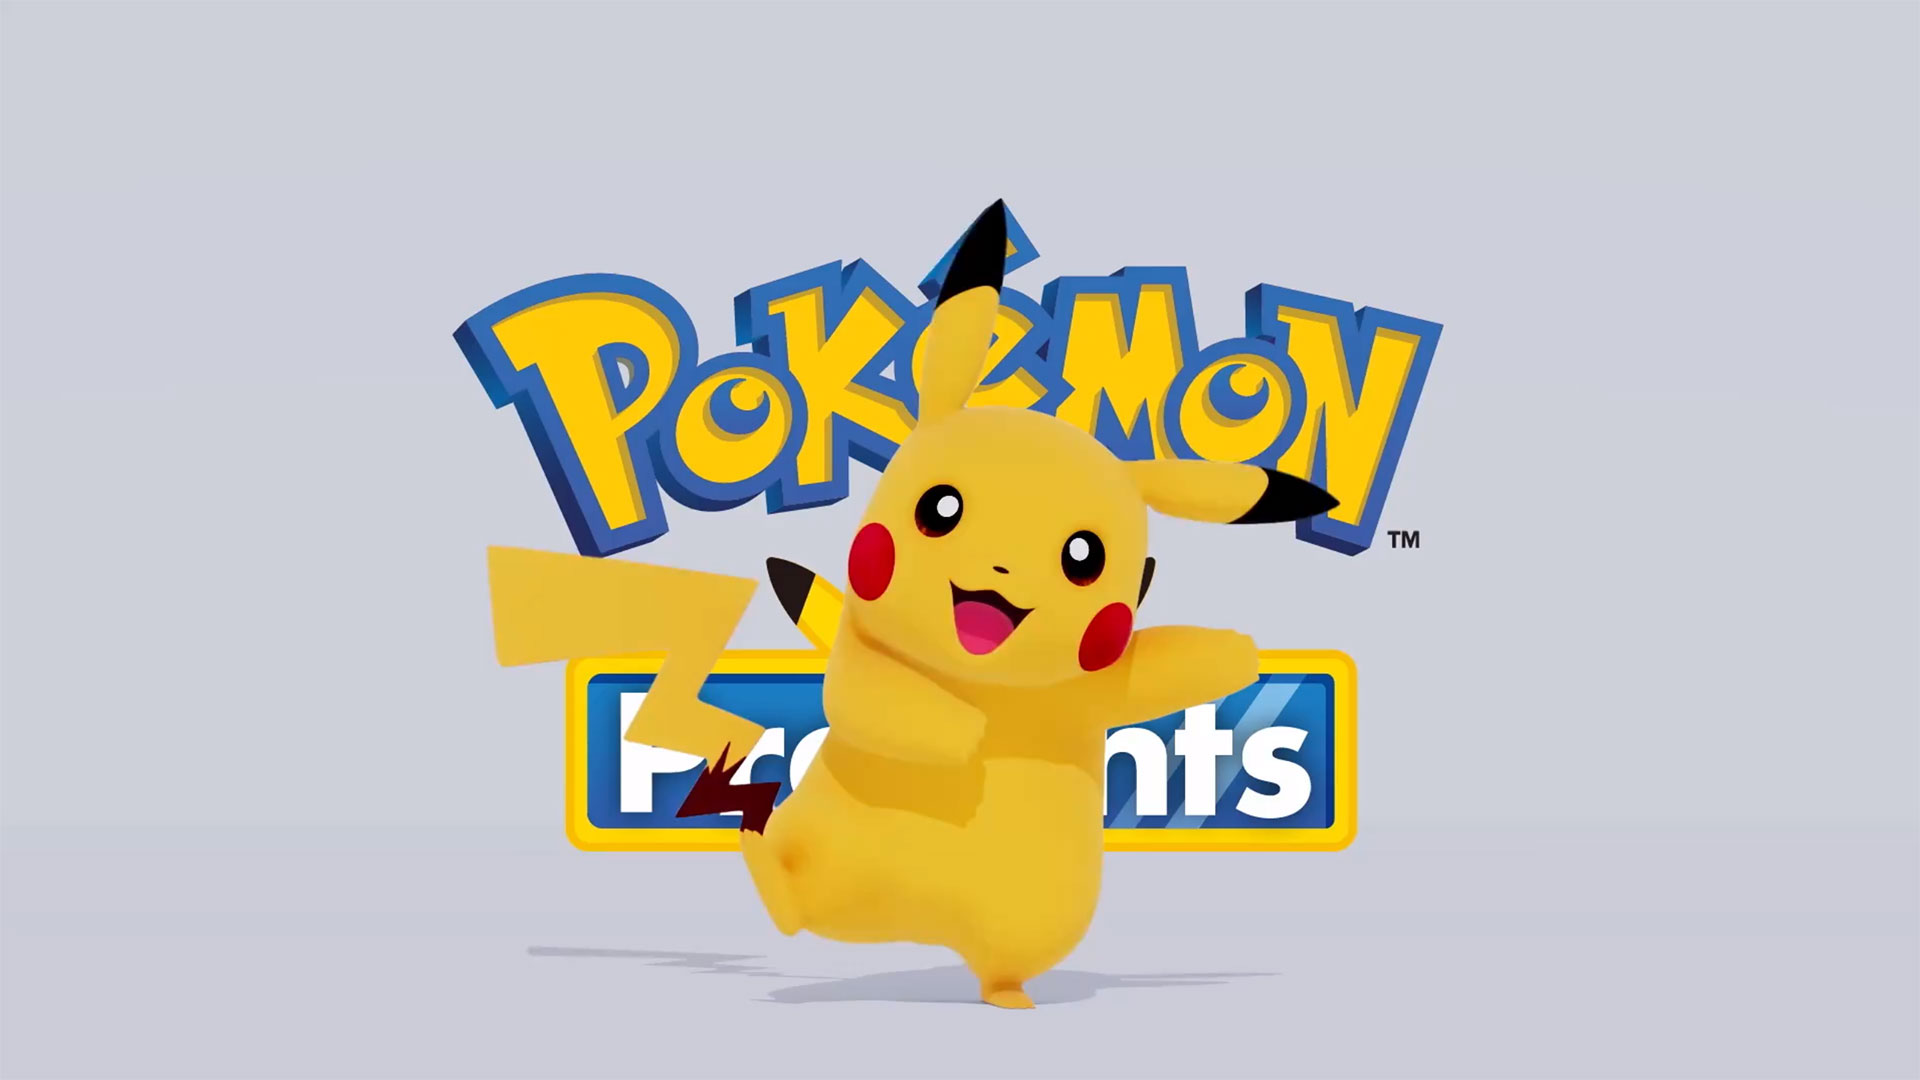 A Pokémon presents is scheduled for February 27